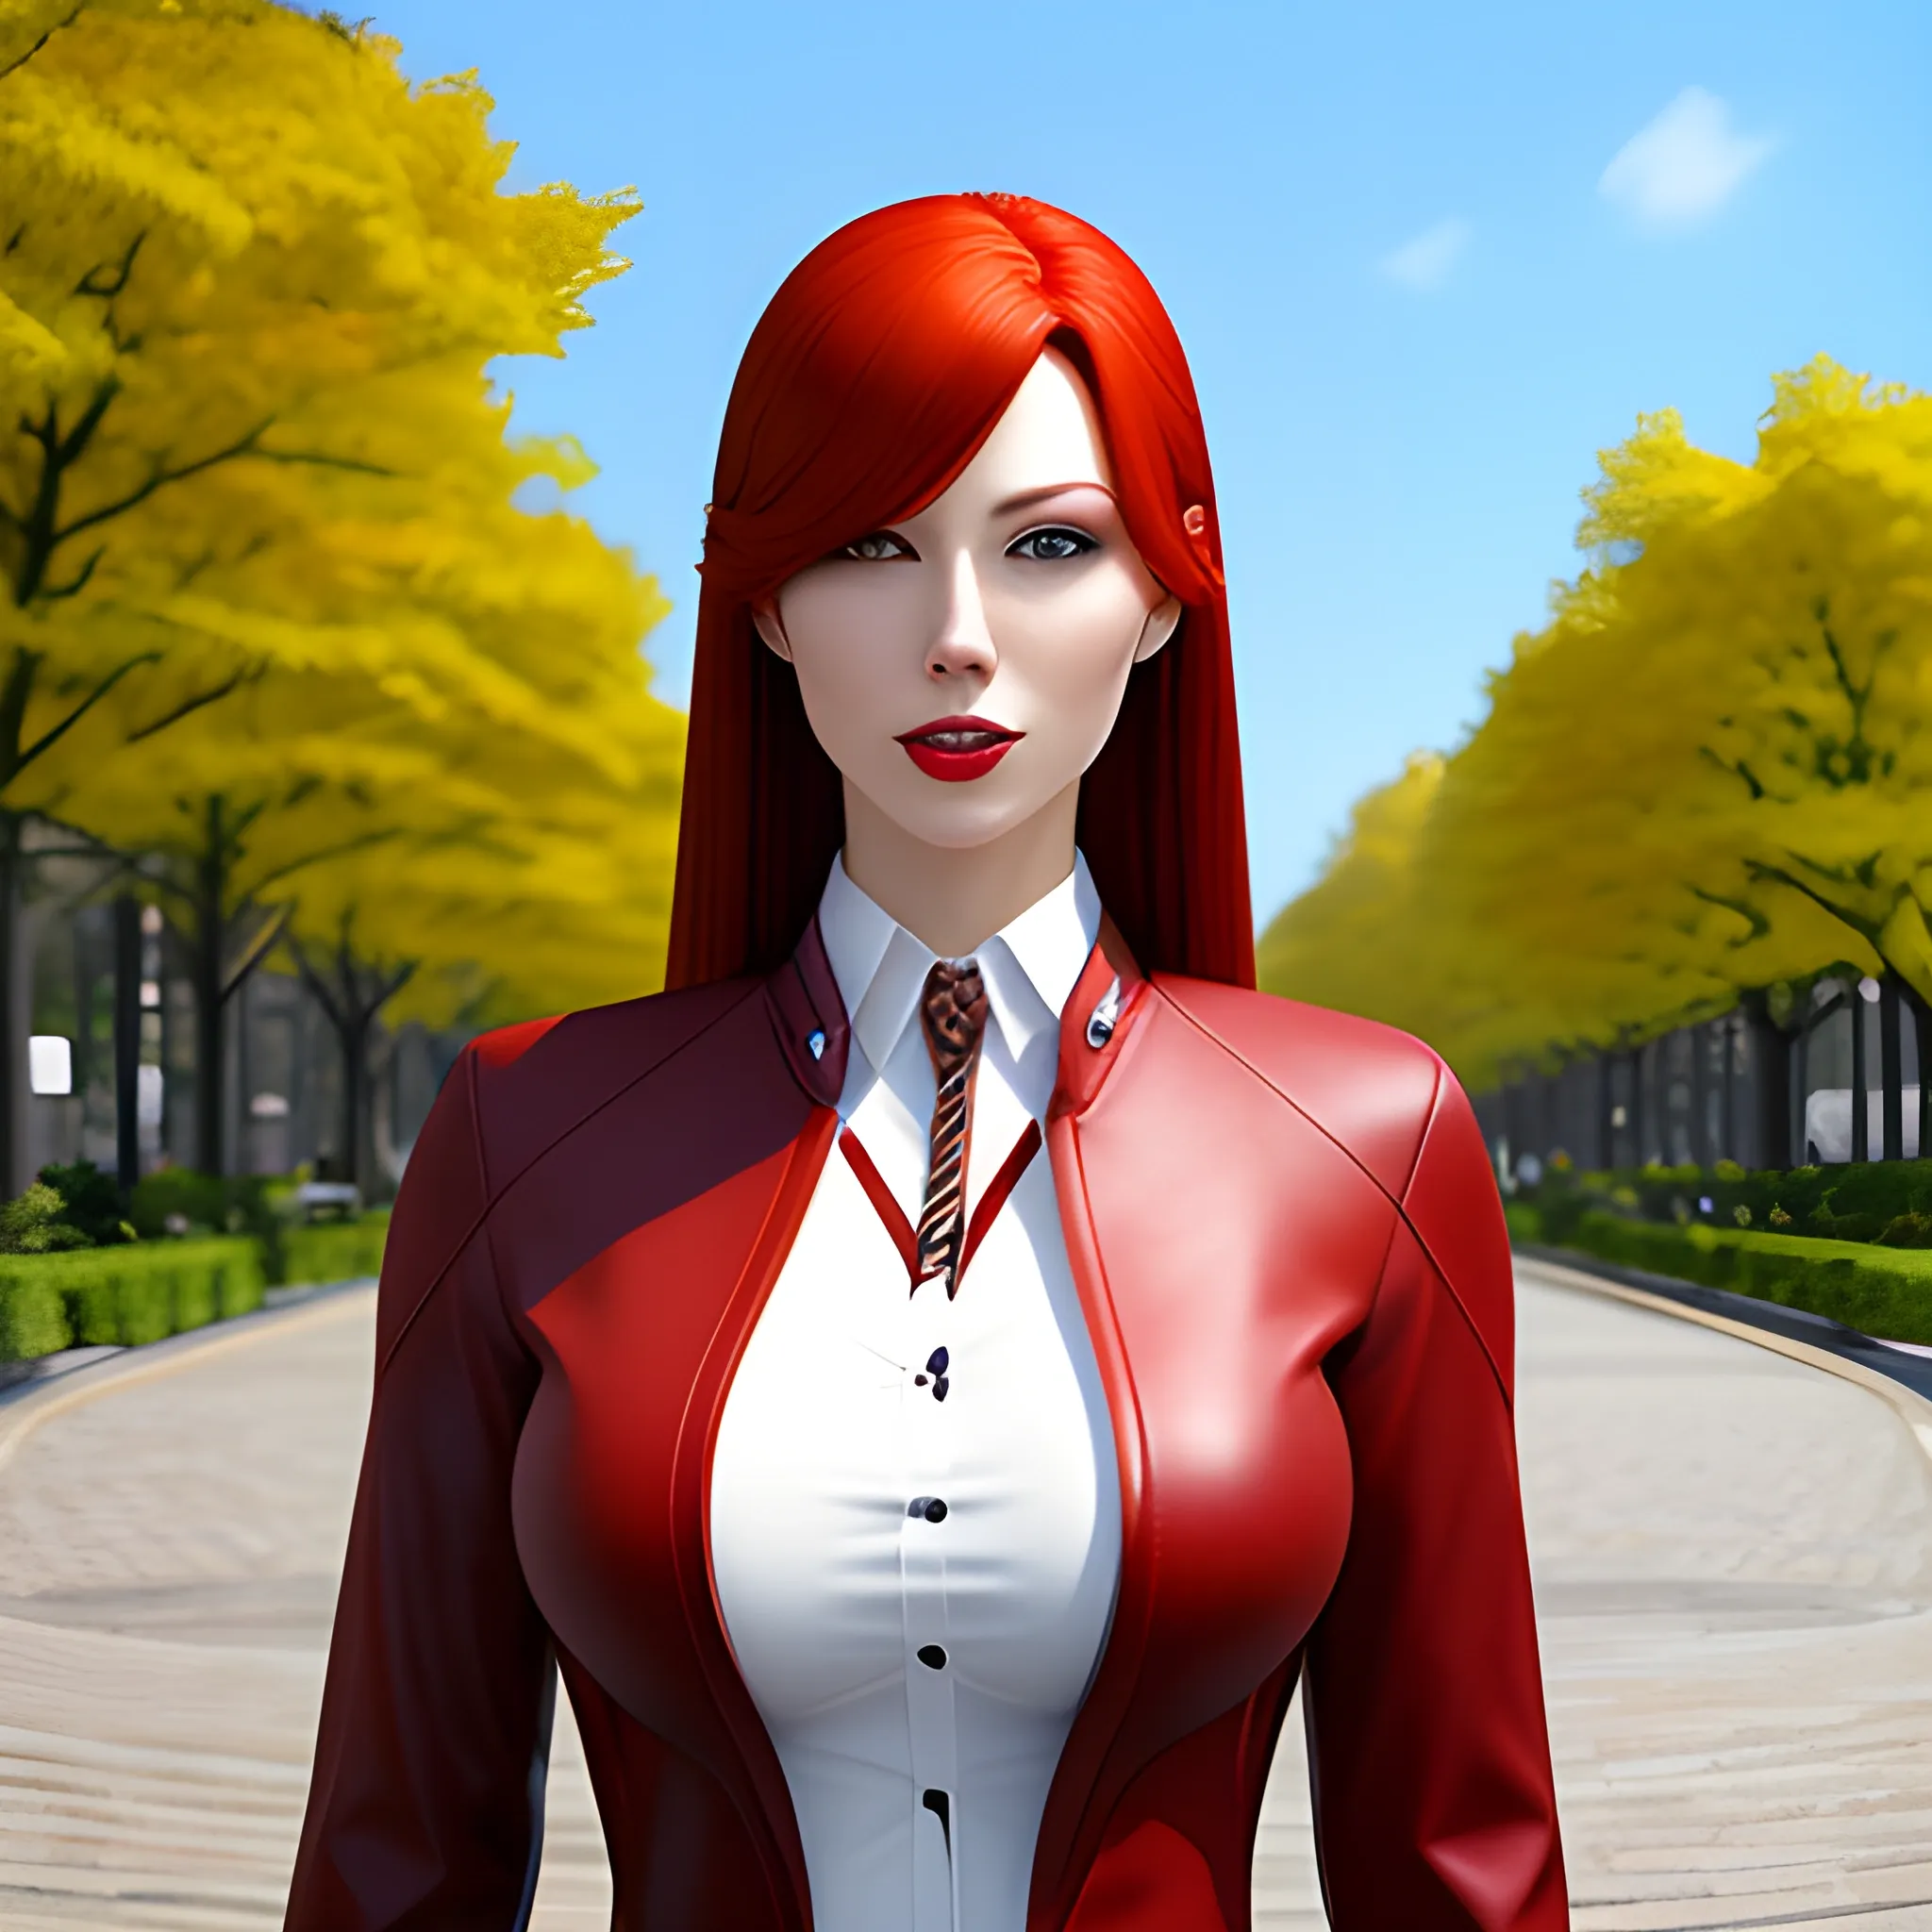 create a photorealistic image of a red-haired female child wearing a Japanese leather school uniform standing in front of a playground. Pretty eyes, sexy mouth, whole body visible, lots of skin, maximum details.